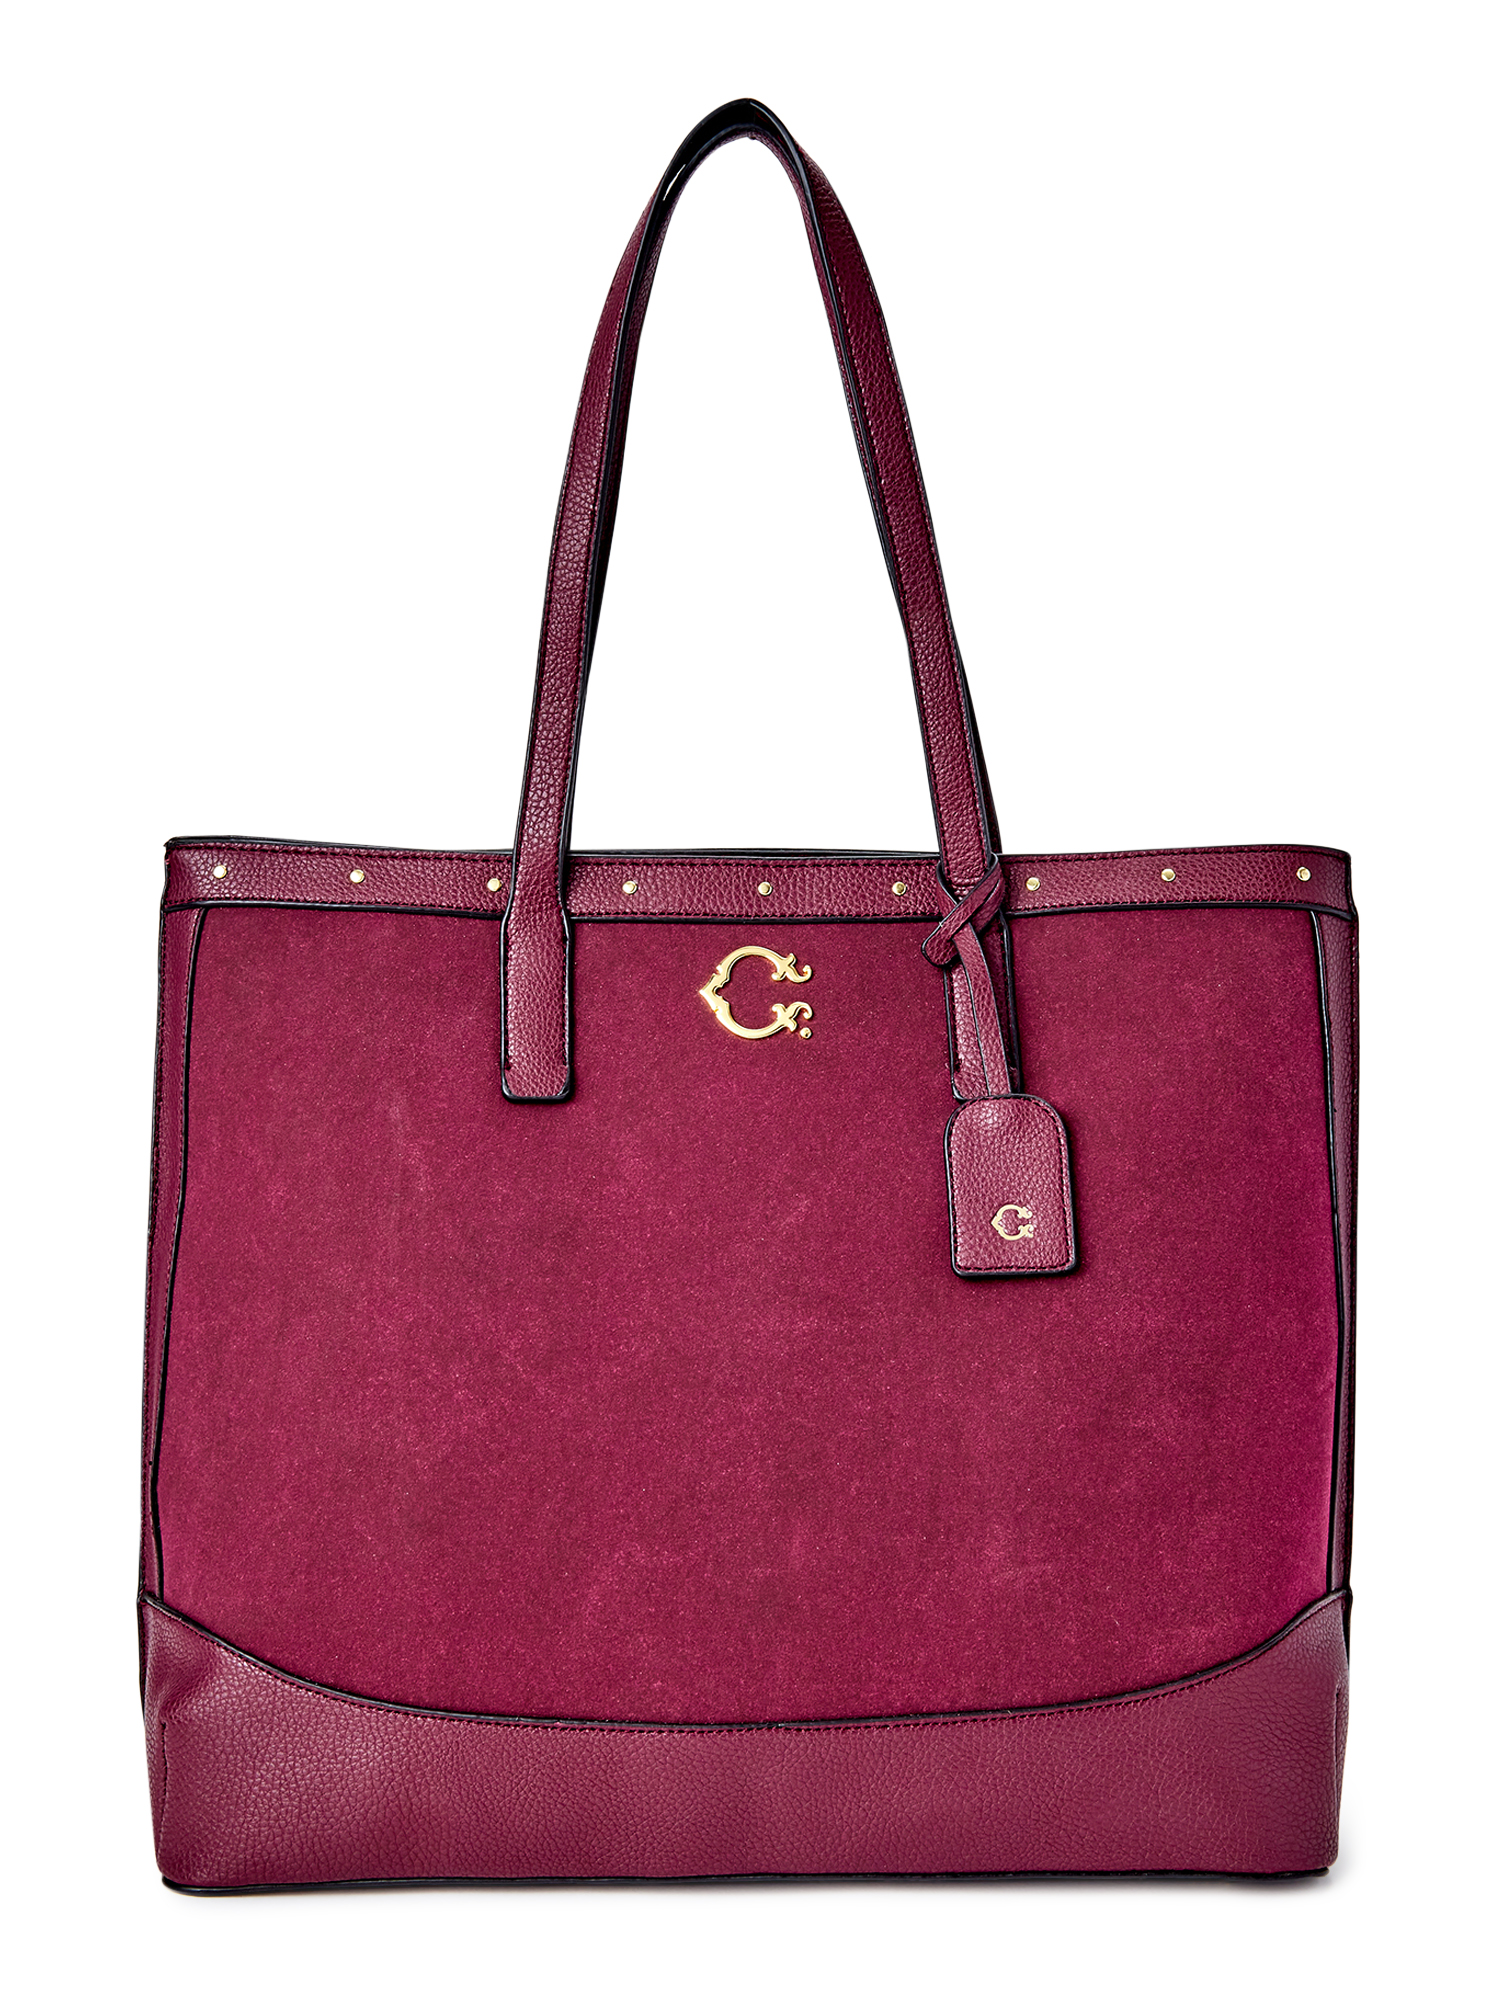 C. Wonder Women's Emma Faux Suede Studded Tote Bag Wine - image 1 of 5